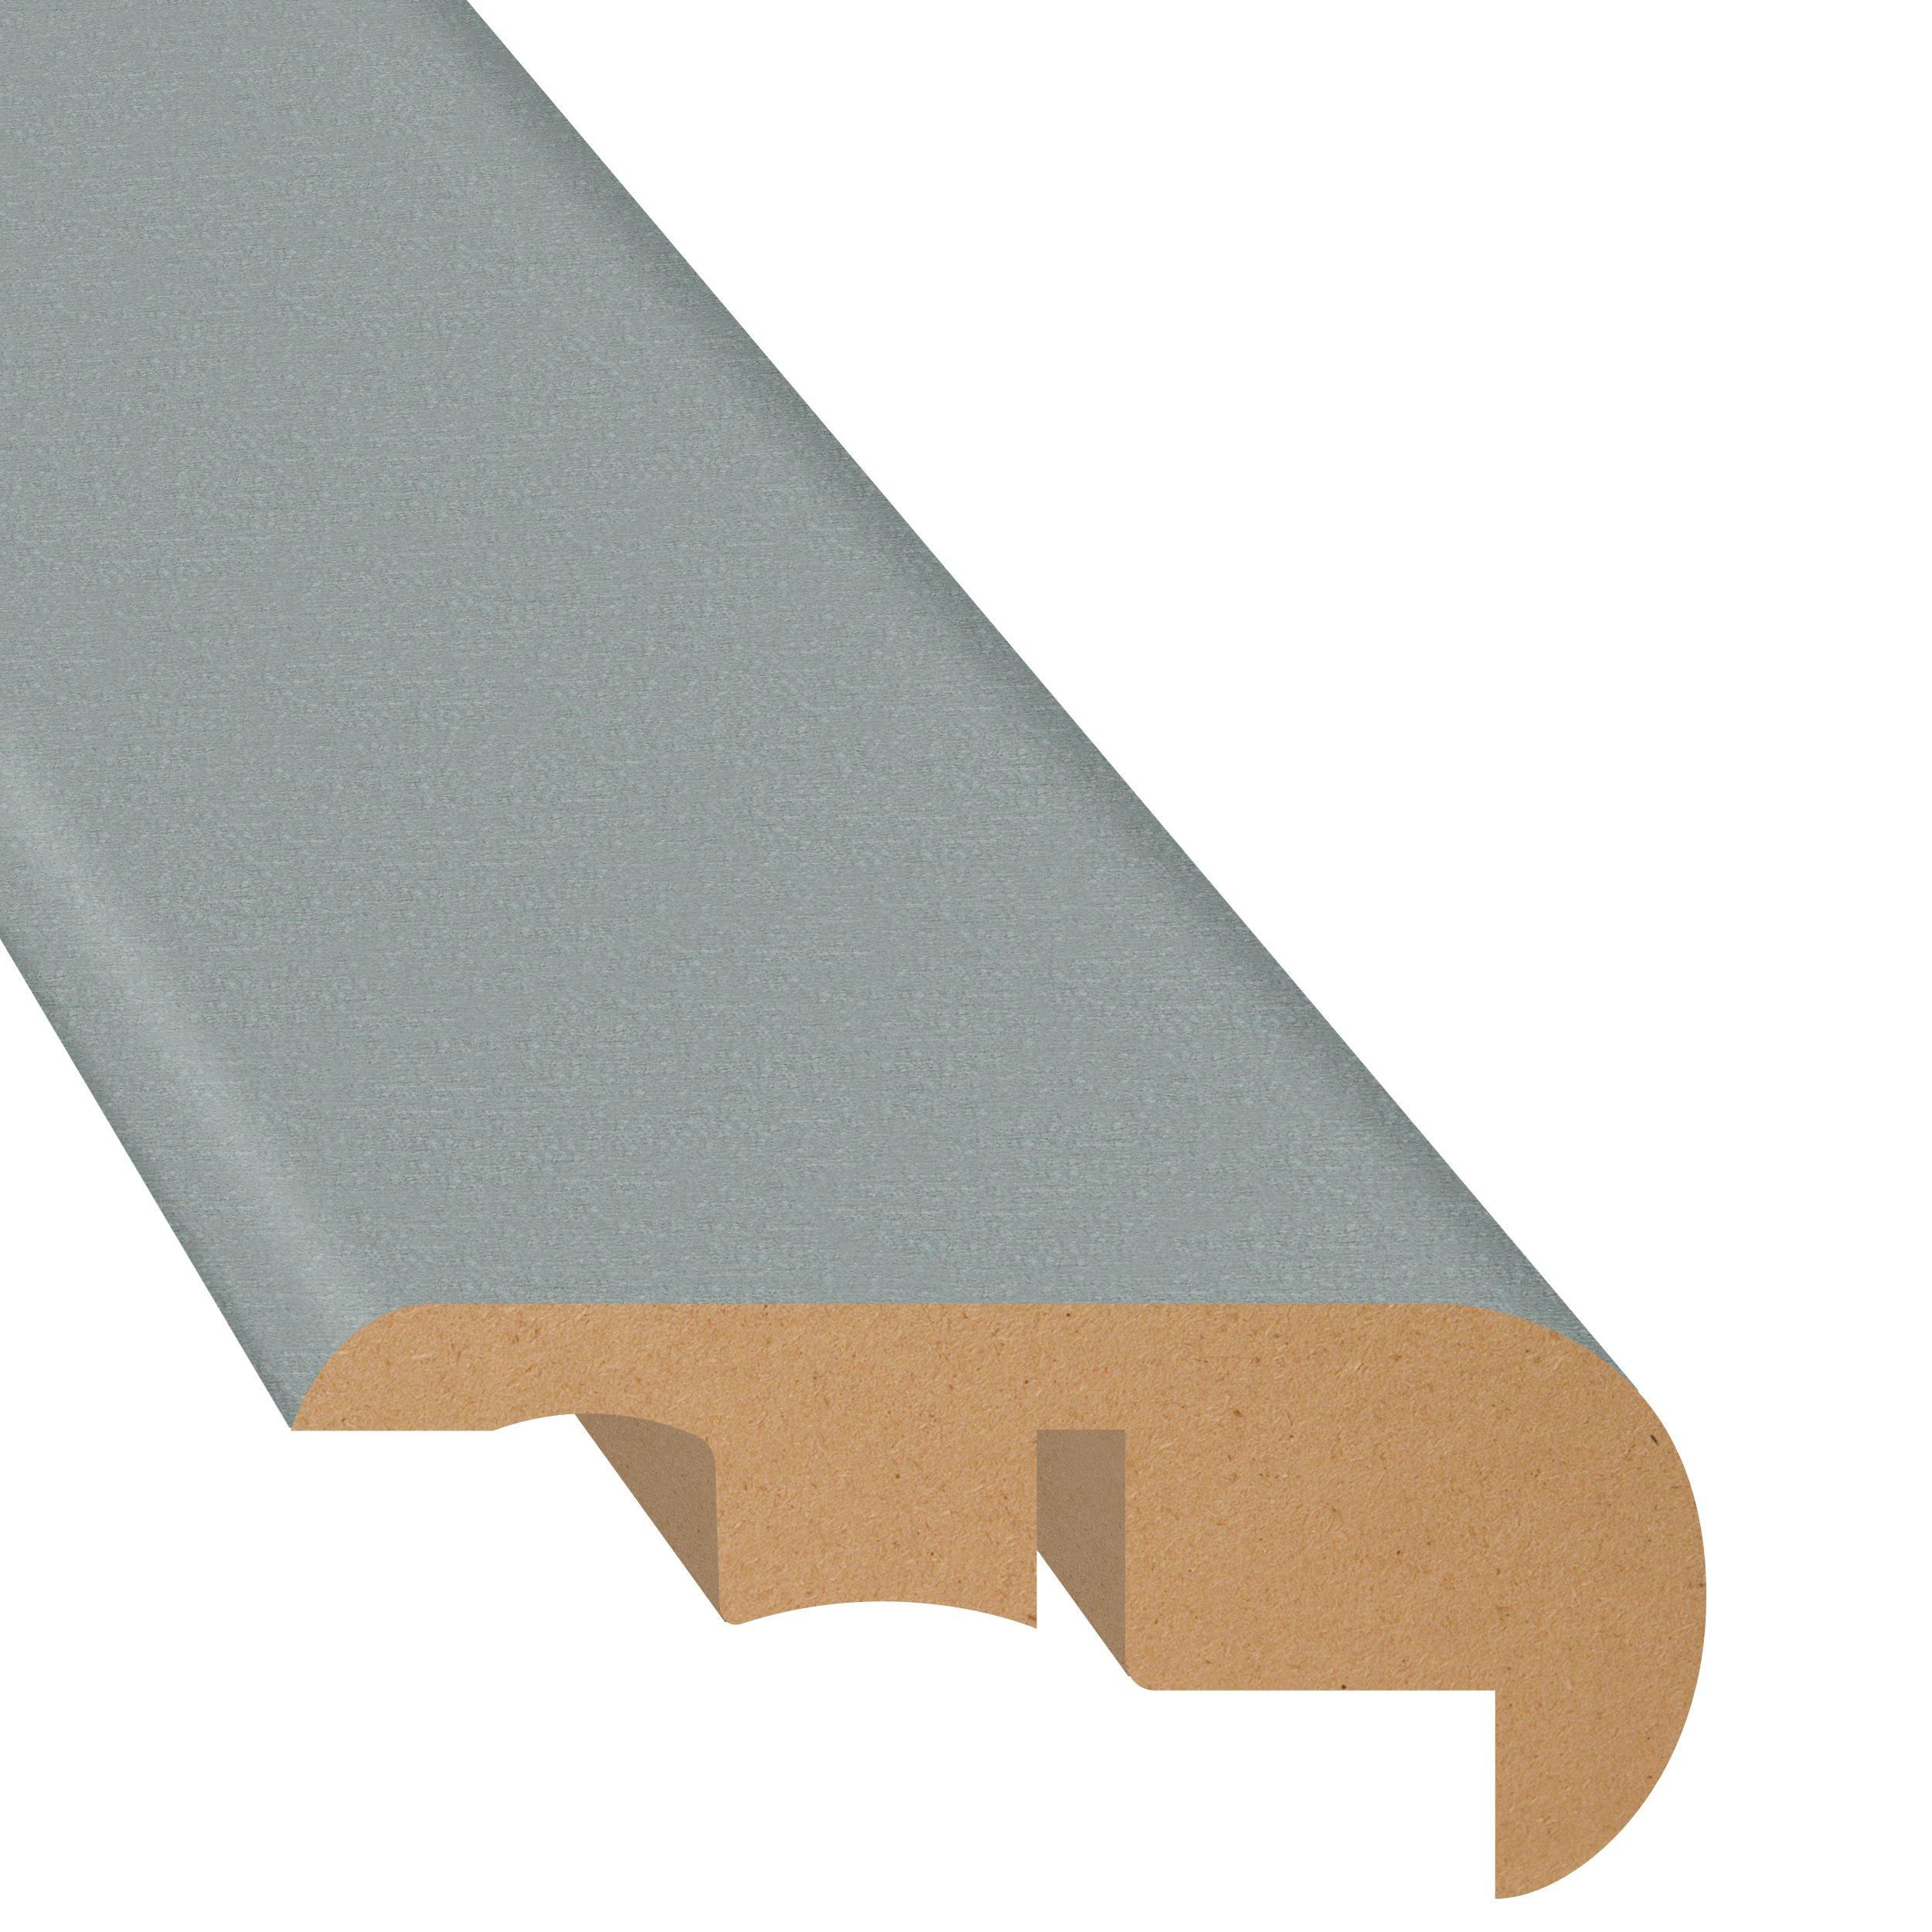 Abbot Tile Aqua 94in. Laminate Overlapping Stair Nose